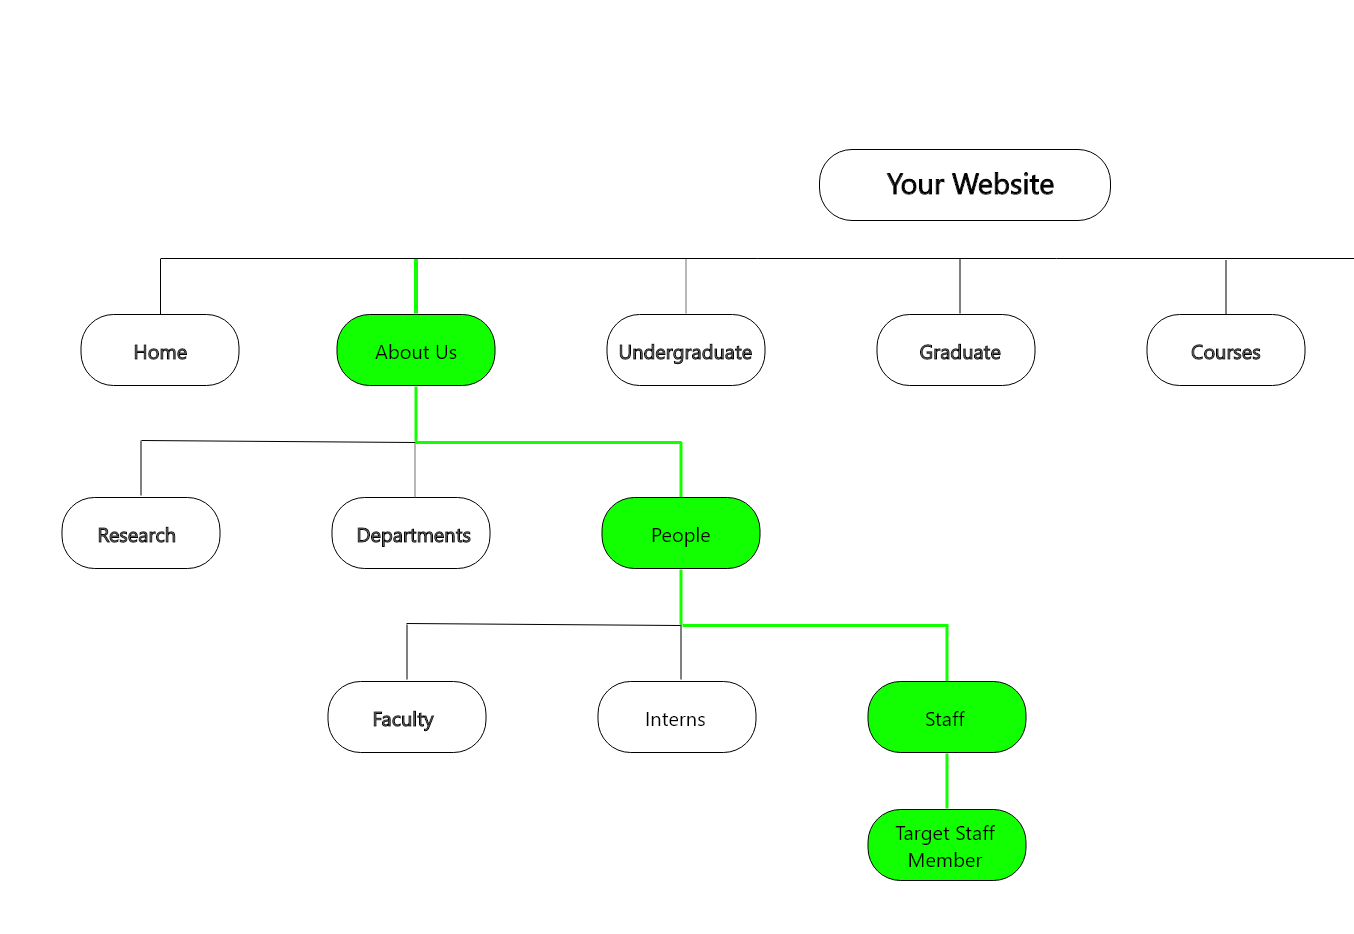 Sitemap showing connection between 'About Us,' 'People,' 'Staff,' and individual Staff Member in a website navigational structure 